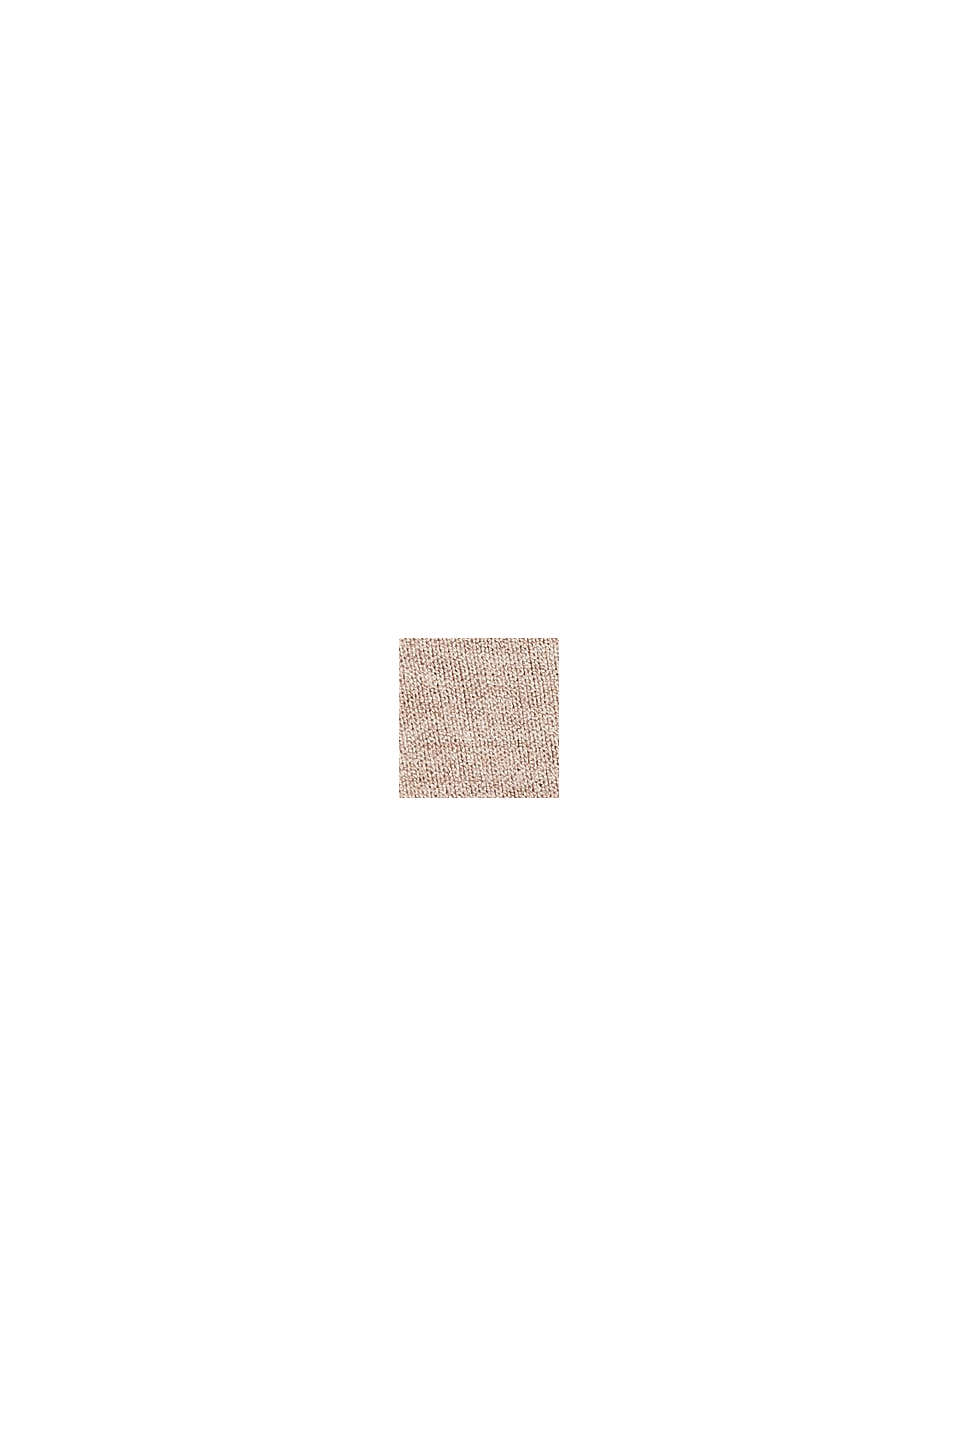 Pull-over en fine maille, LENZING™ ECOVERO™, LIGHT TAUPE, swatch